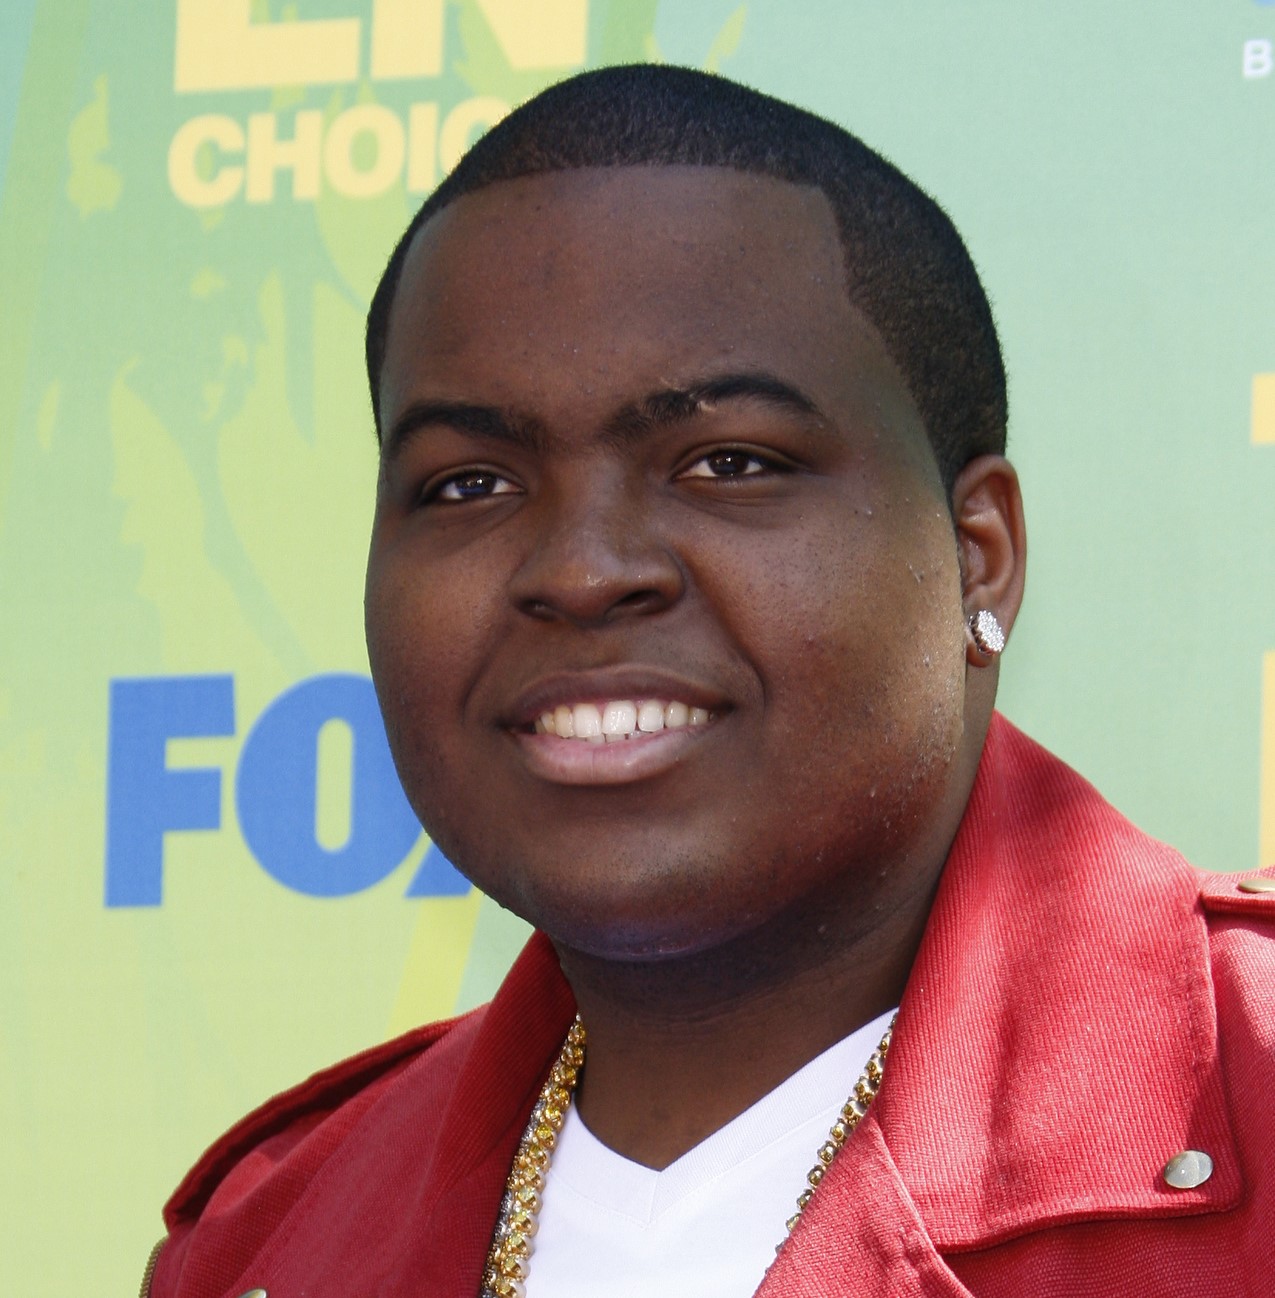 You are currently viewing Urodziny: Sean Kingston (03.02)